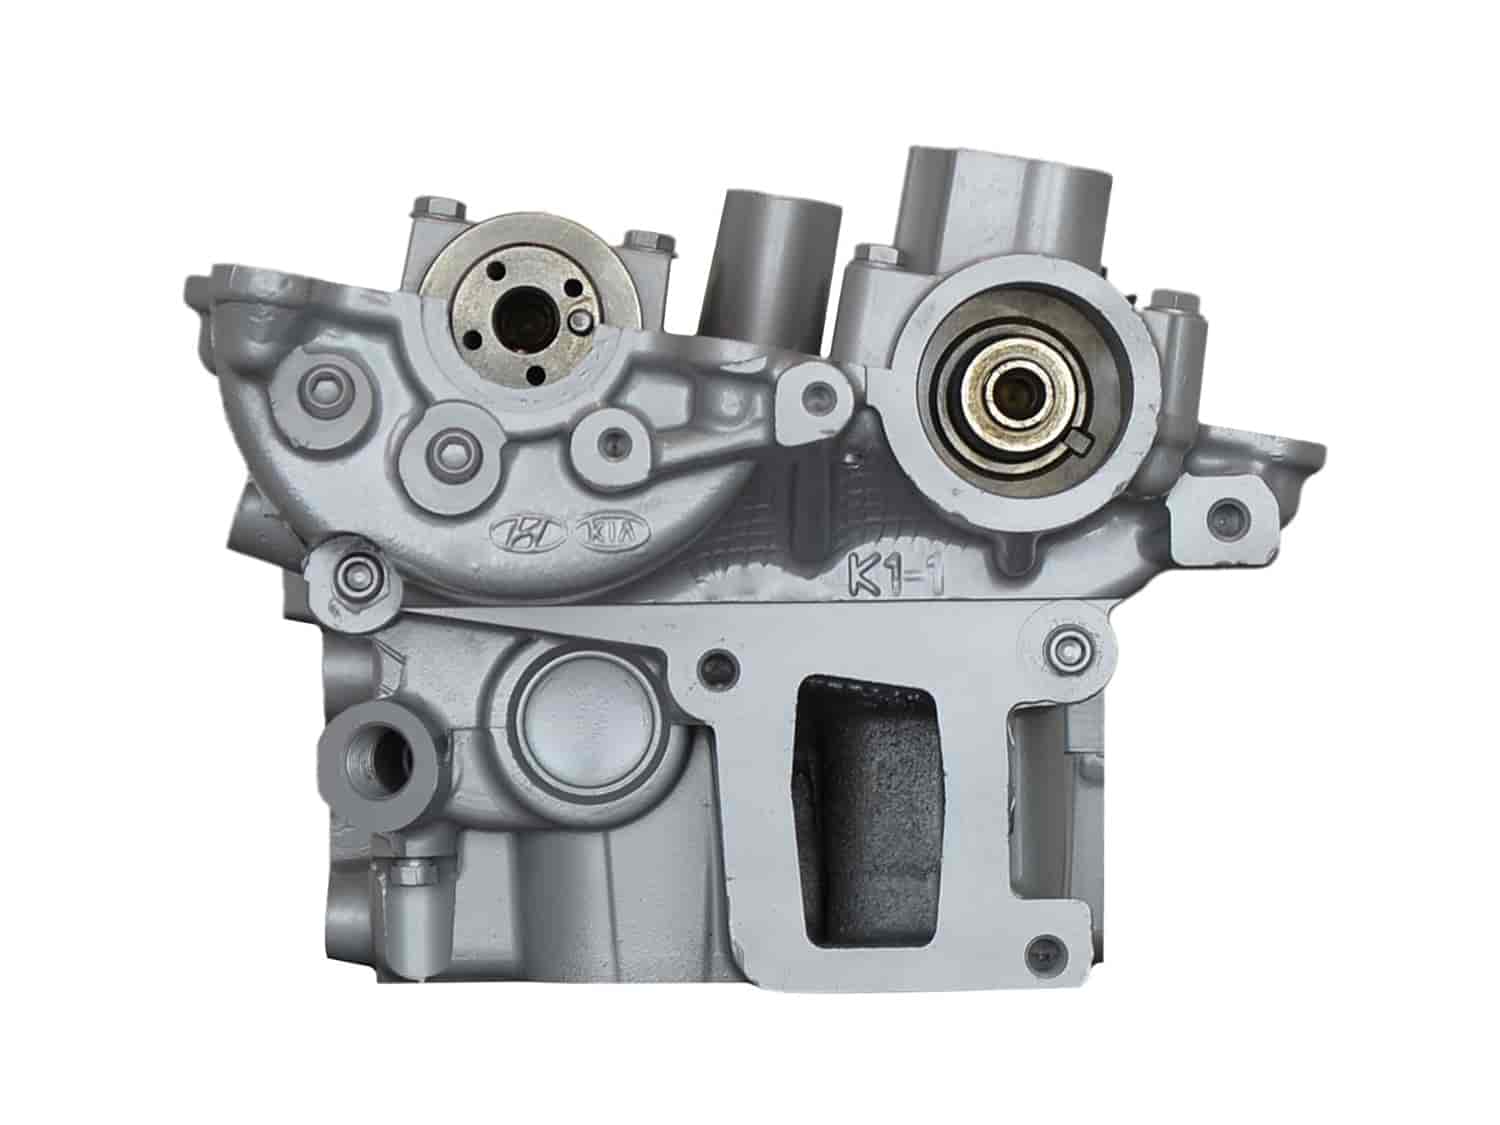 Remanufactured Cylinder Head for 2006-2012 Hyundai with 1.6L